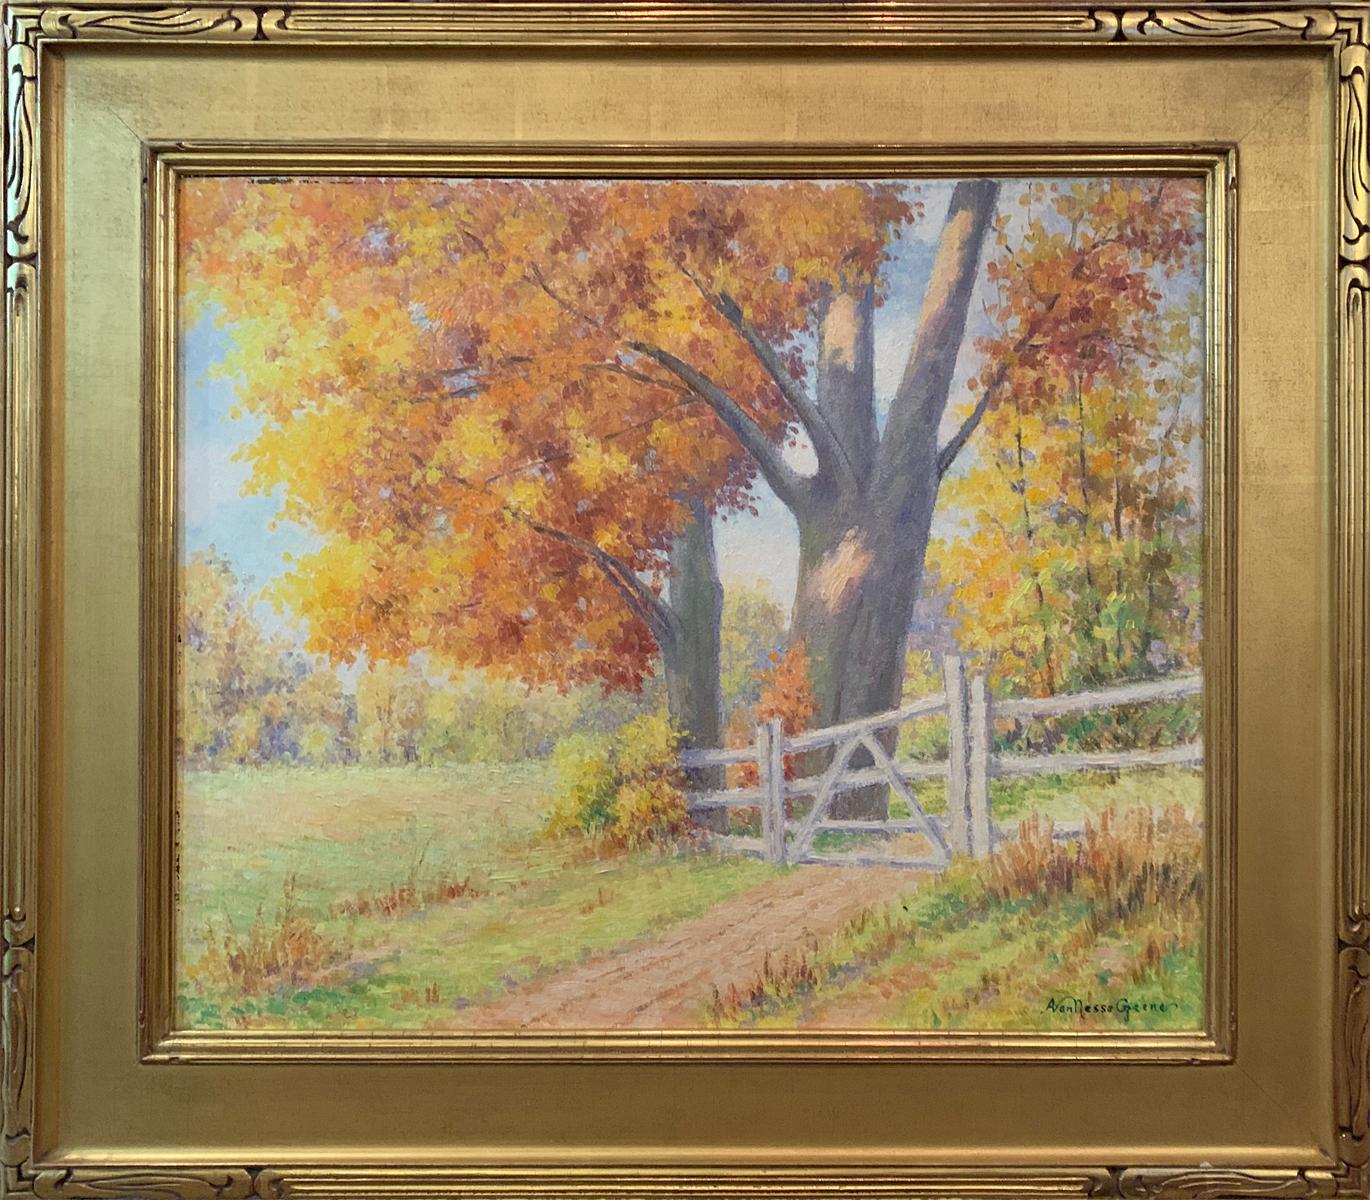 "Golden Maple" is a 20" x 24" oil on board, impressionist painting by Albert Van Nesse Greene. It is framed and signed "A Van Nesse Greene" at the lower right. The painting came from a private collection in Chester Springs, Pennsylvania. Additional